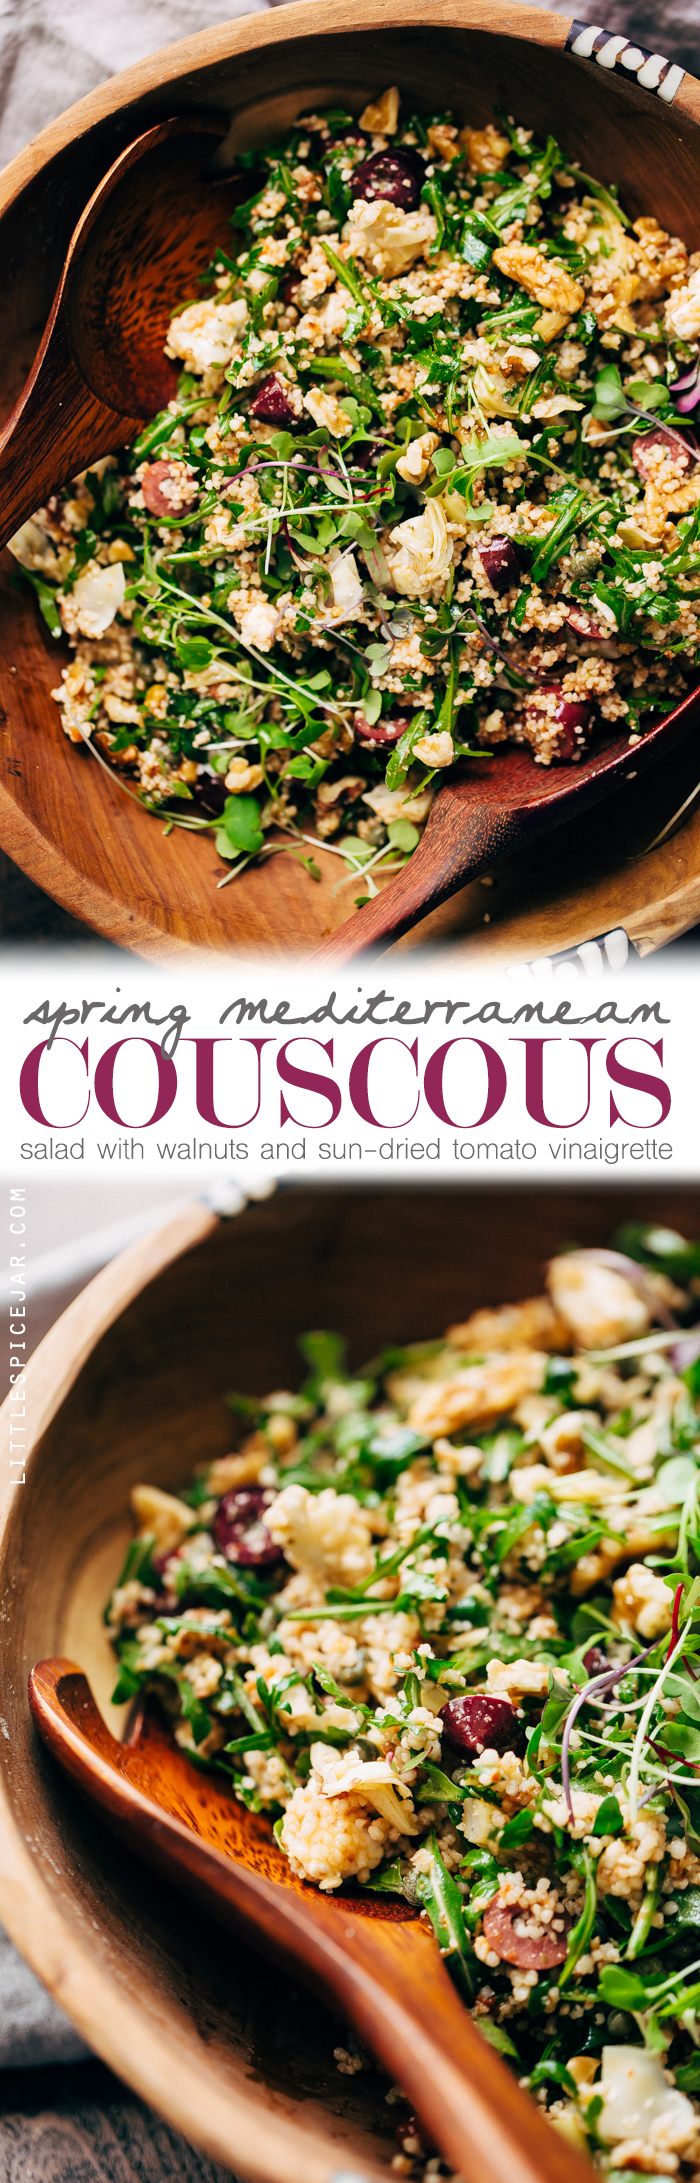 Spring Mediterranean Couscous Salad with Sun-dried Tomato Vinaigrette - a clean the fridge kind of salad where you can use up all the little bits of what you have leftover! #sponsored #mediterraneansalad #couscoussalad #salad #springsalad | Littlespicejar.com